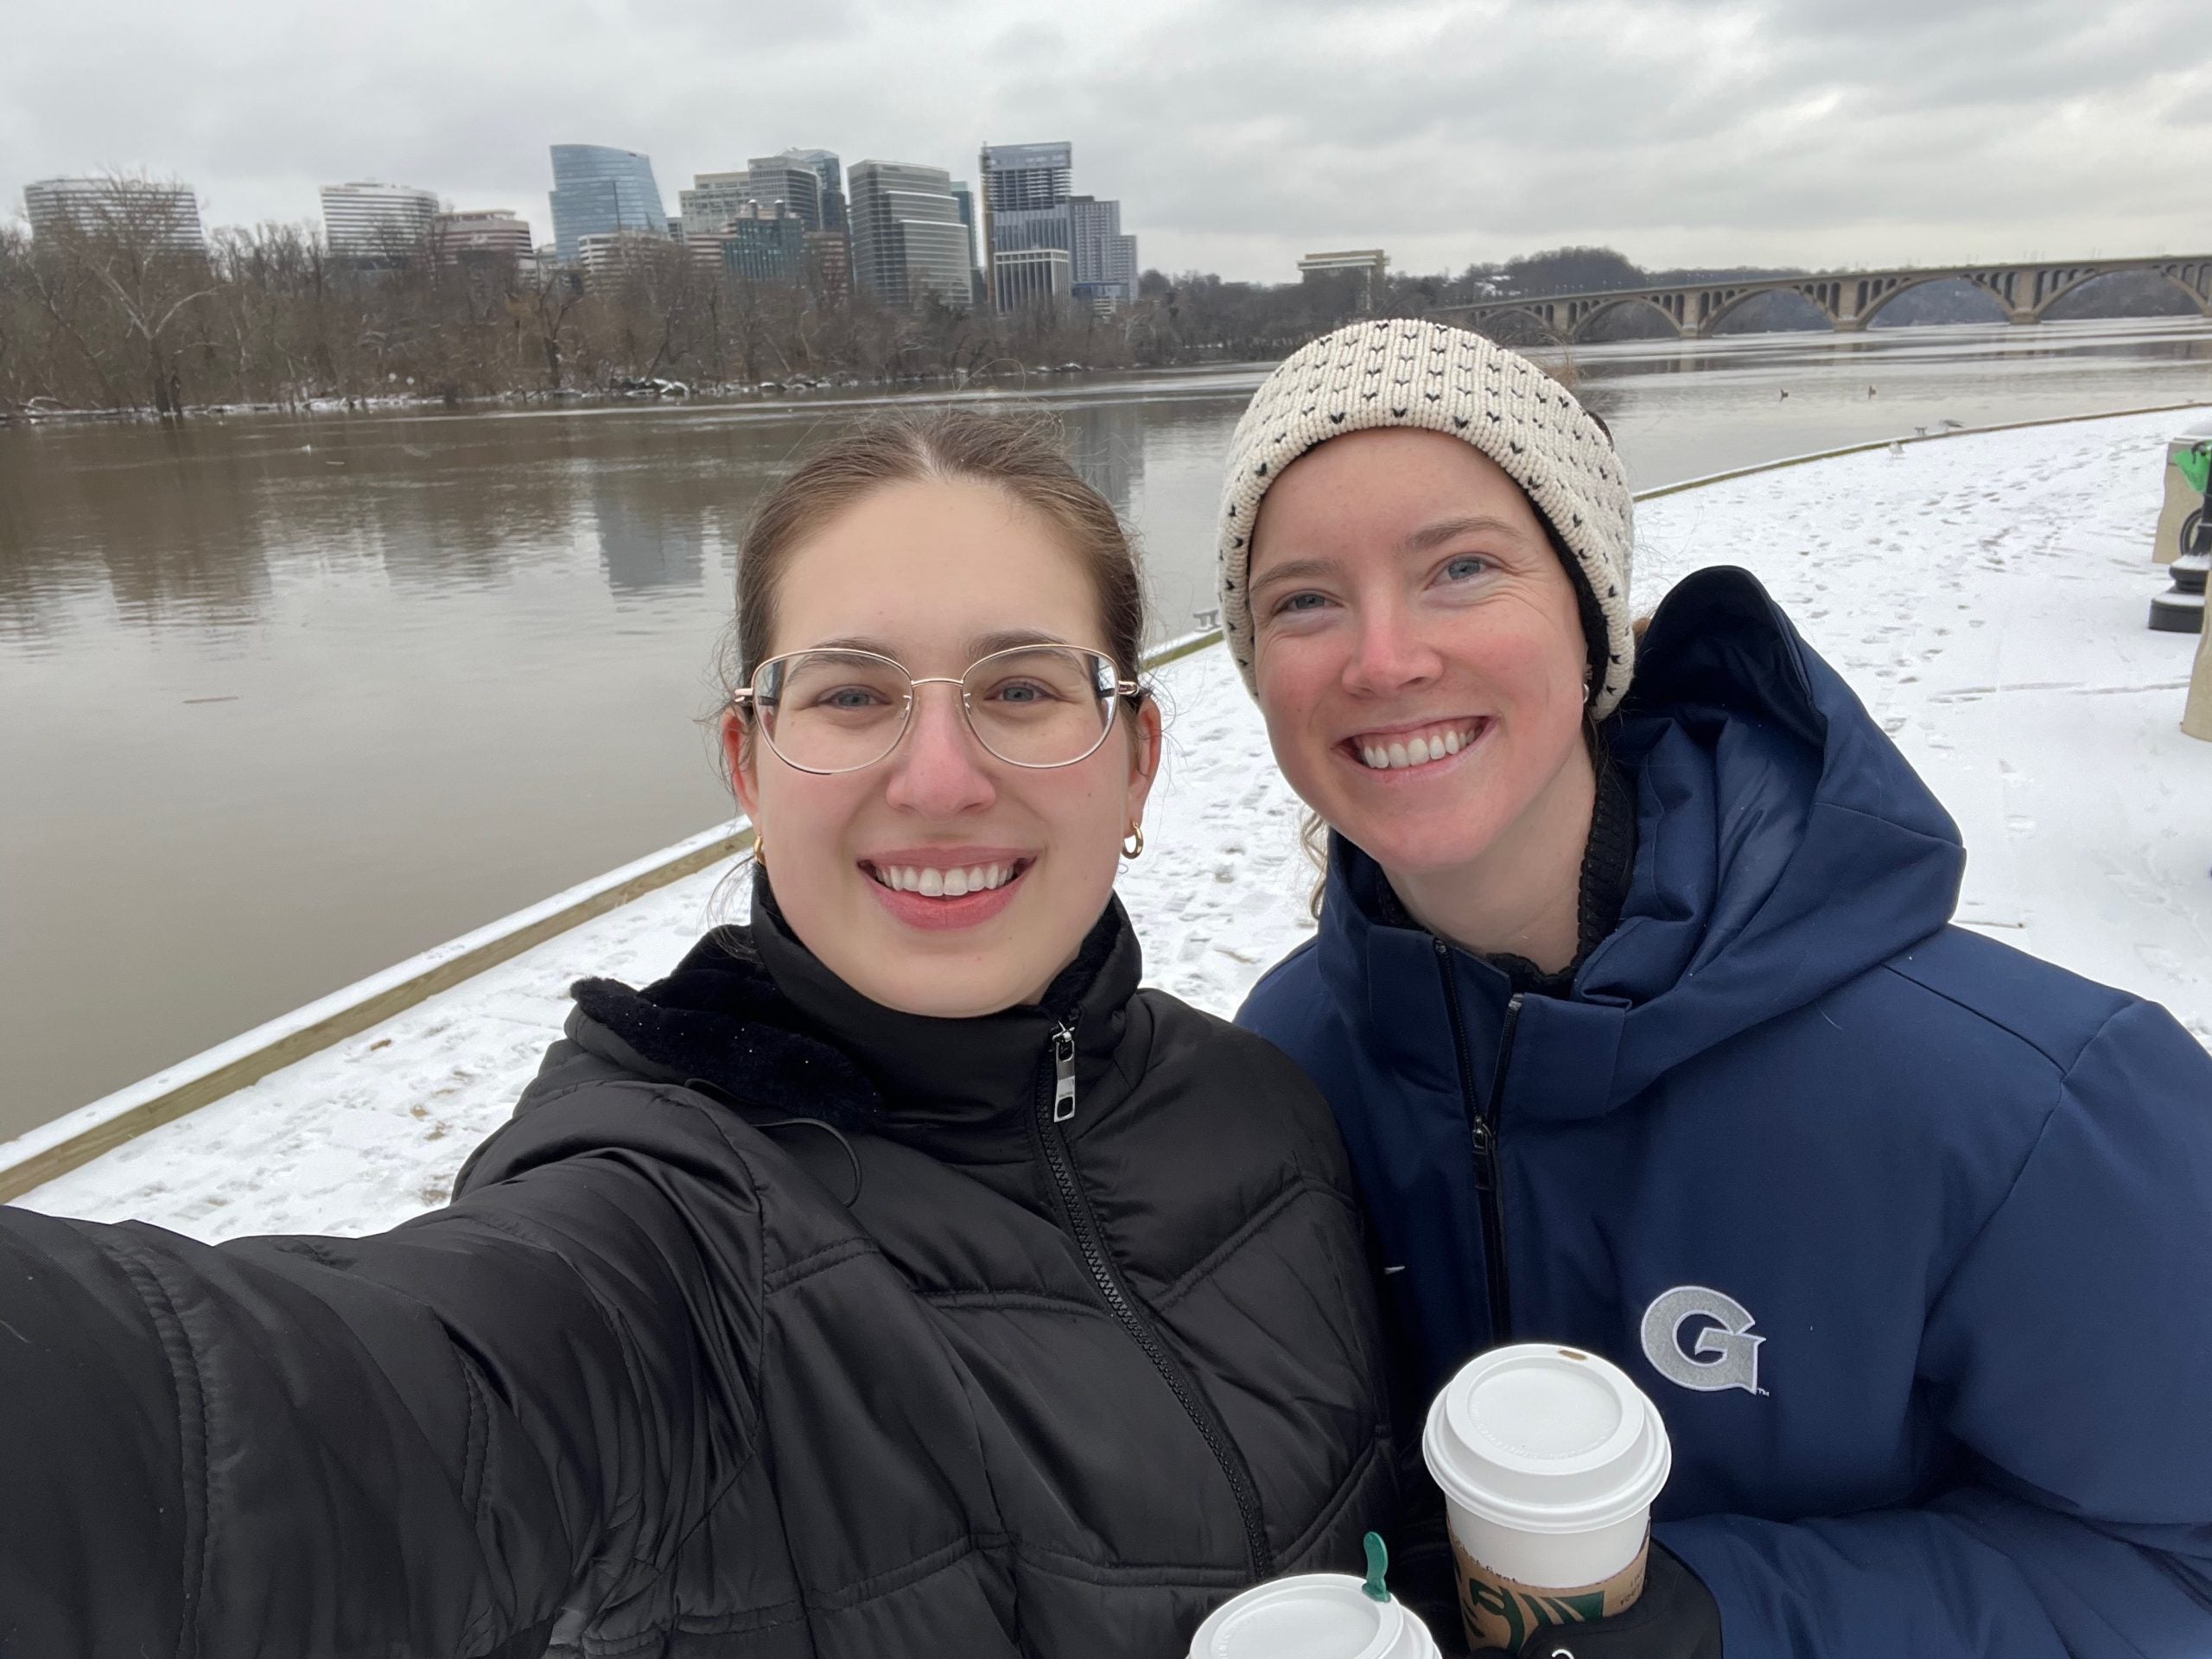 Two white women take a selfie in the winter in front of a river on a cloudy day.